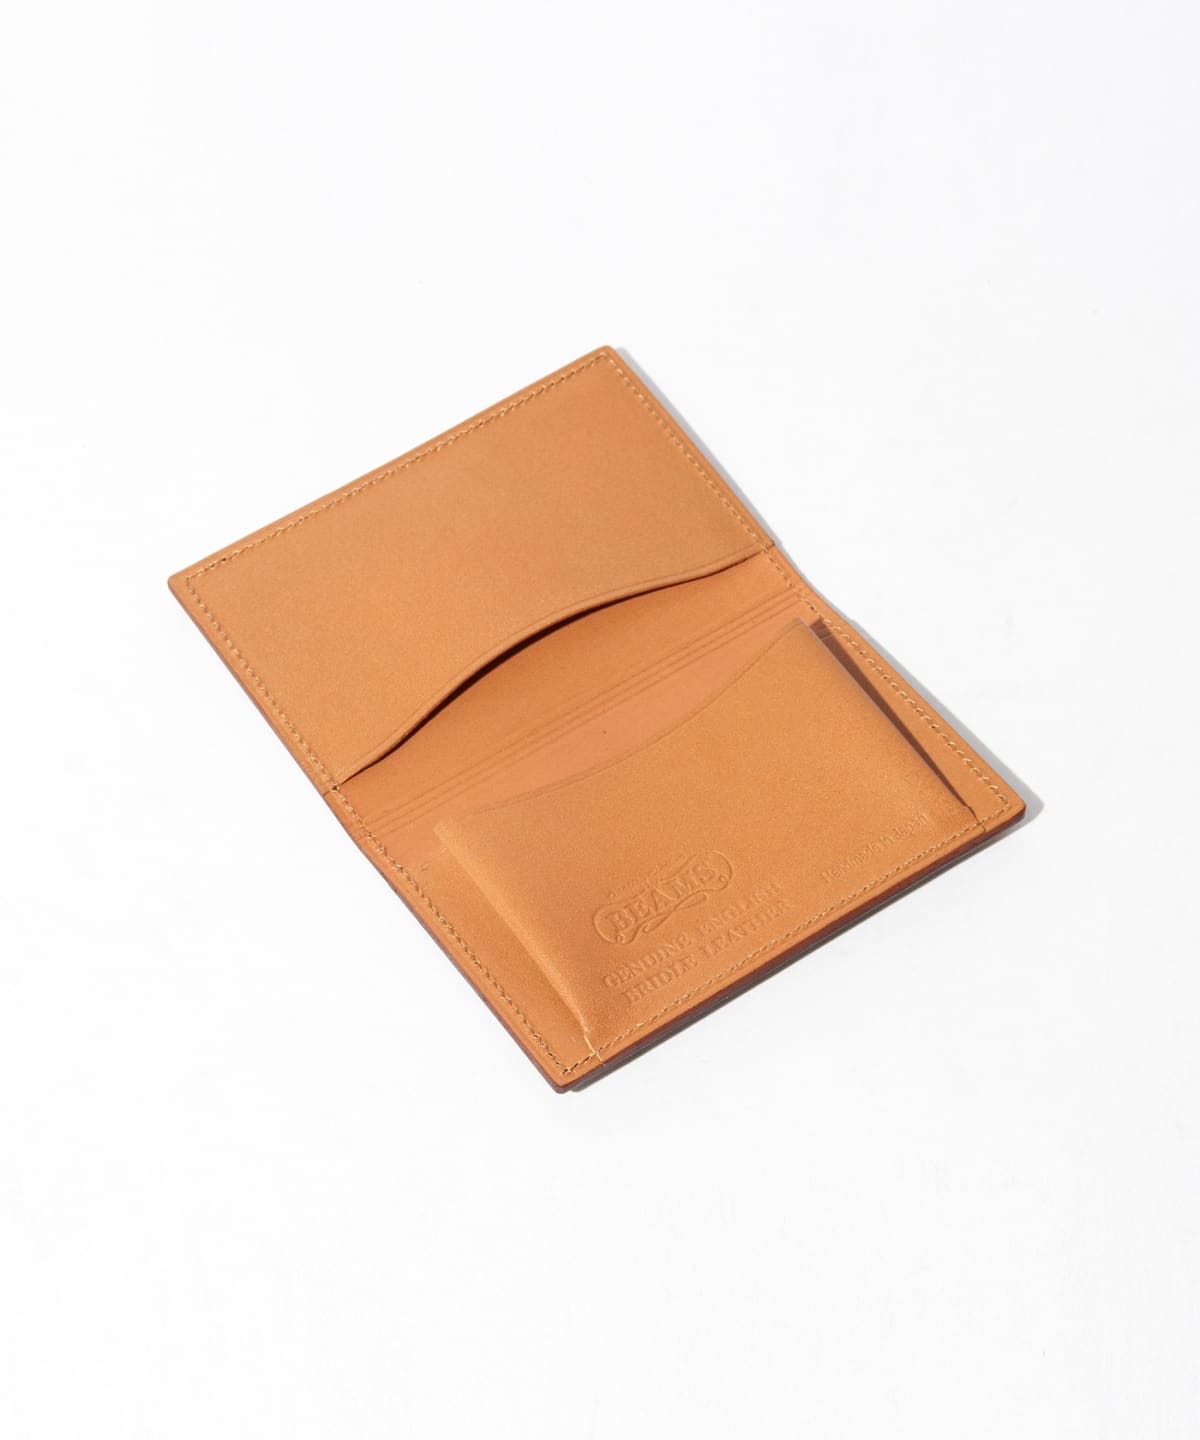 BEAMS PLUS（ビームス プラス）BEAMS PLUS / Card Case Bridle Leather 